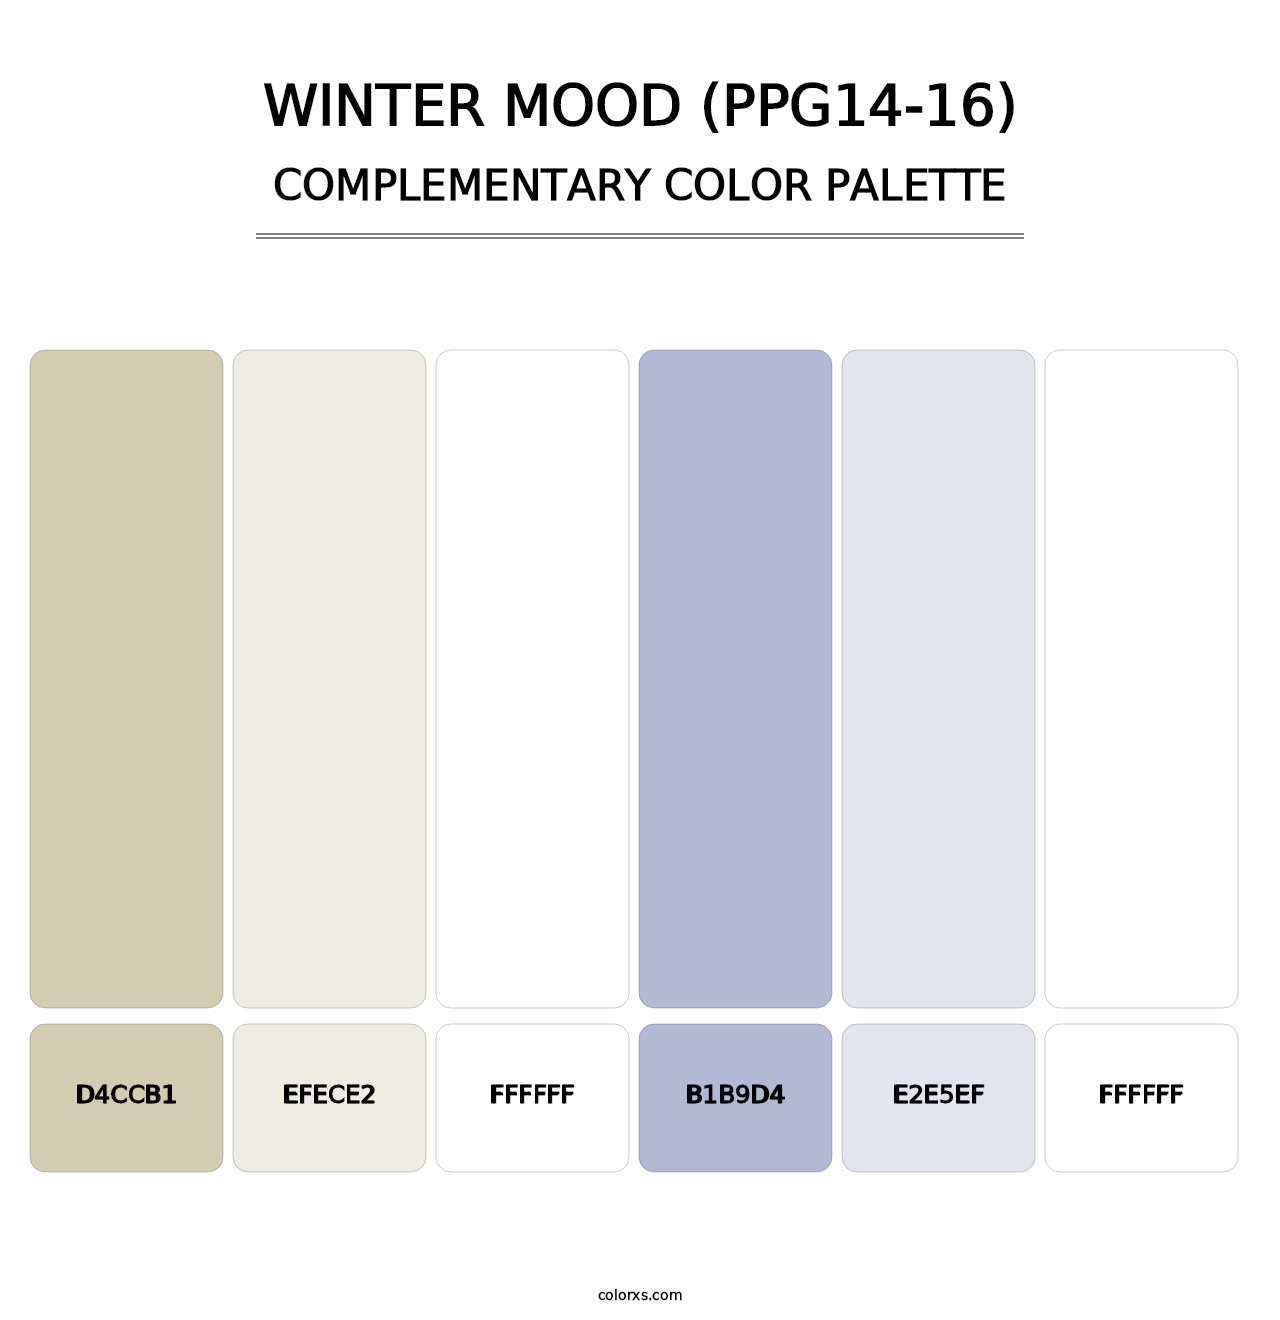 Winter Mood (PPG14-16) - Complementary Color Palette